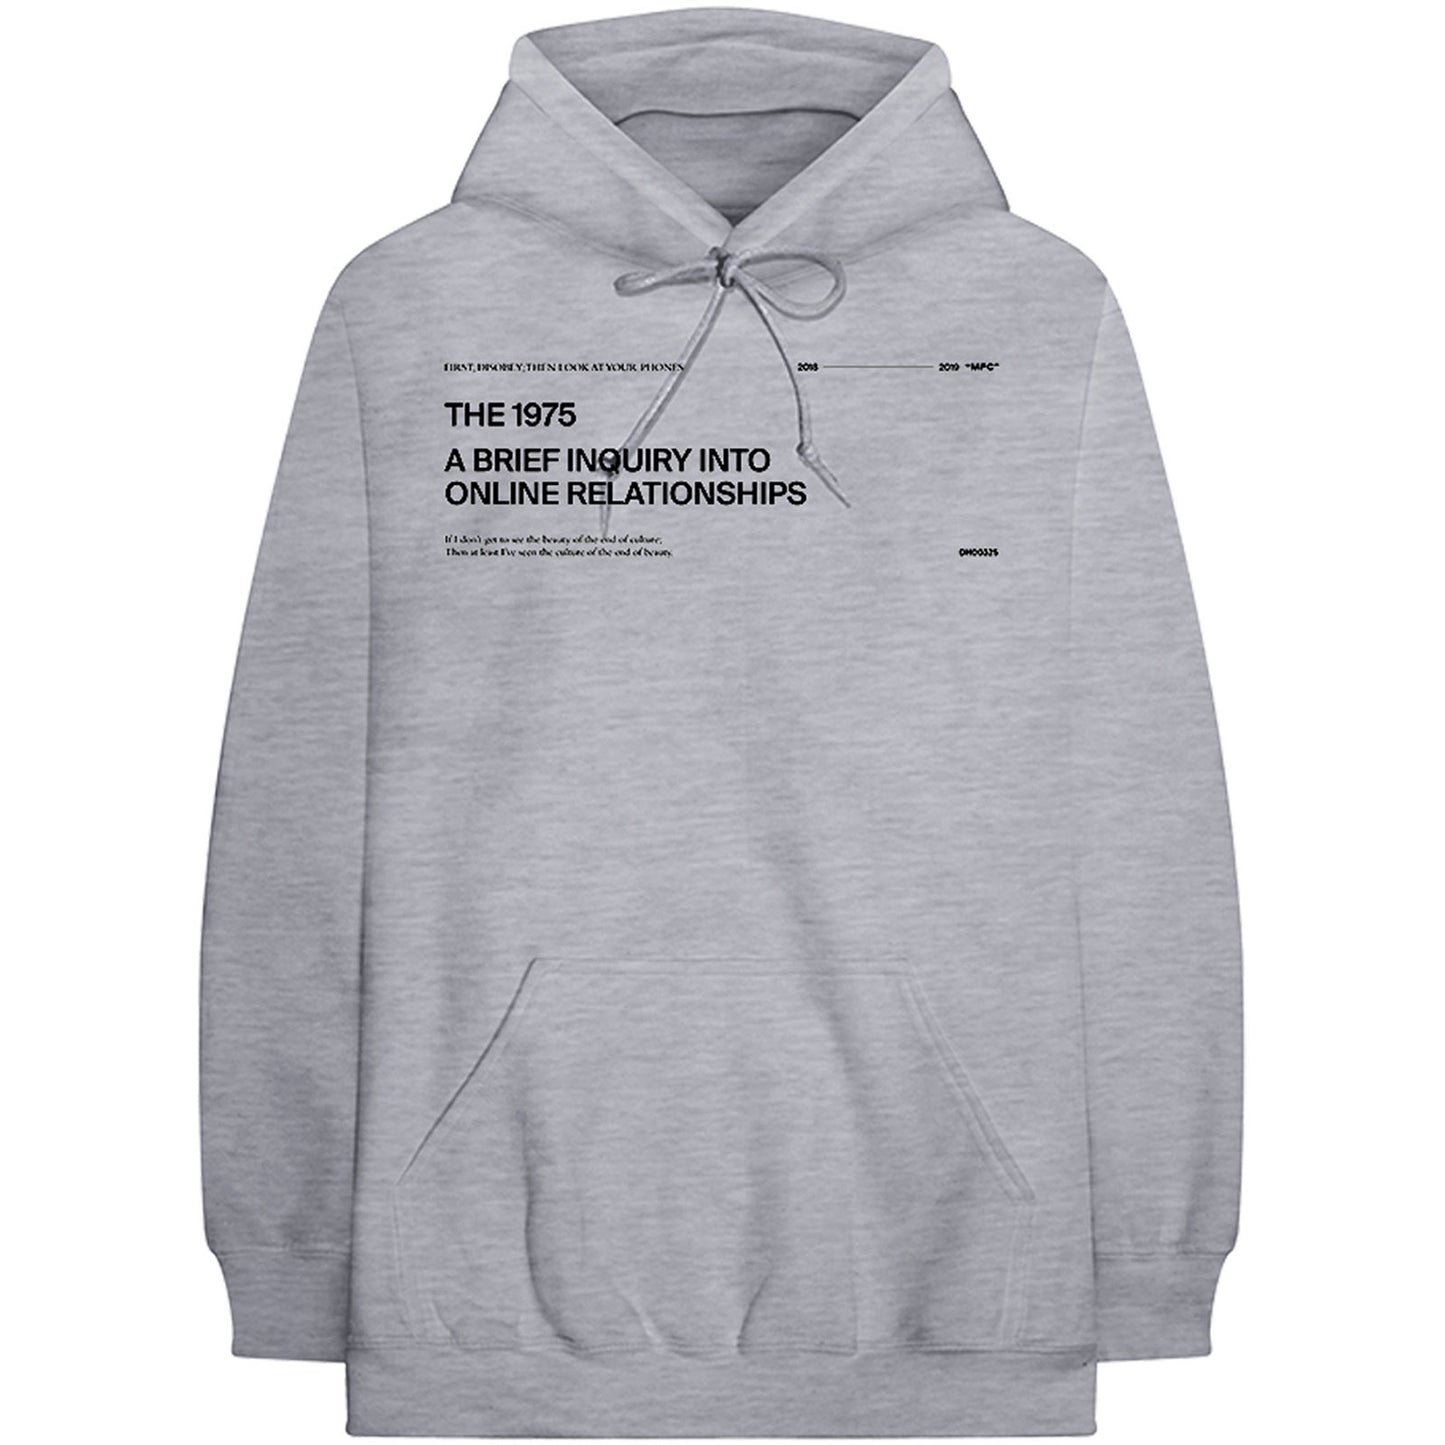 The 1975 Pullover Hoodie: ABIIOR Version 2.